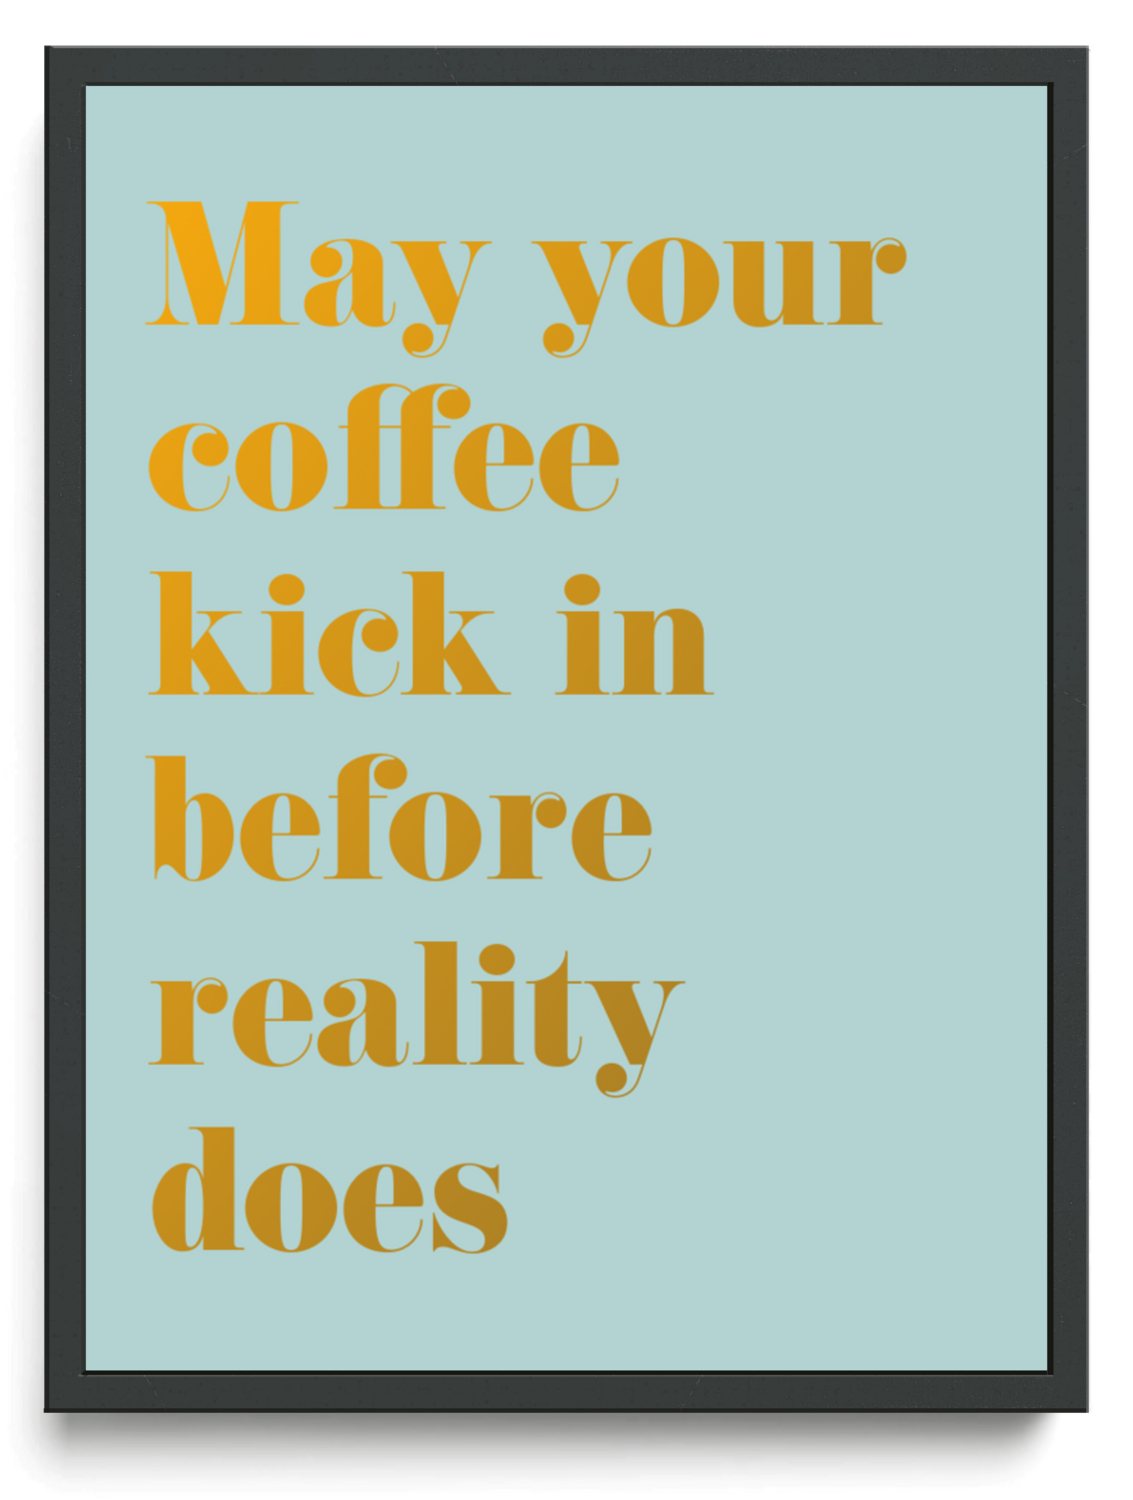 May your coffee kick in before reality does framed typographic print